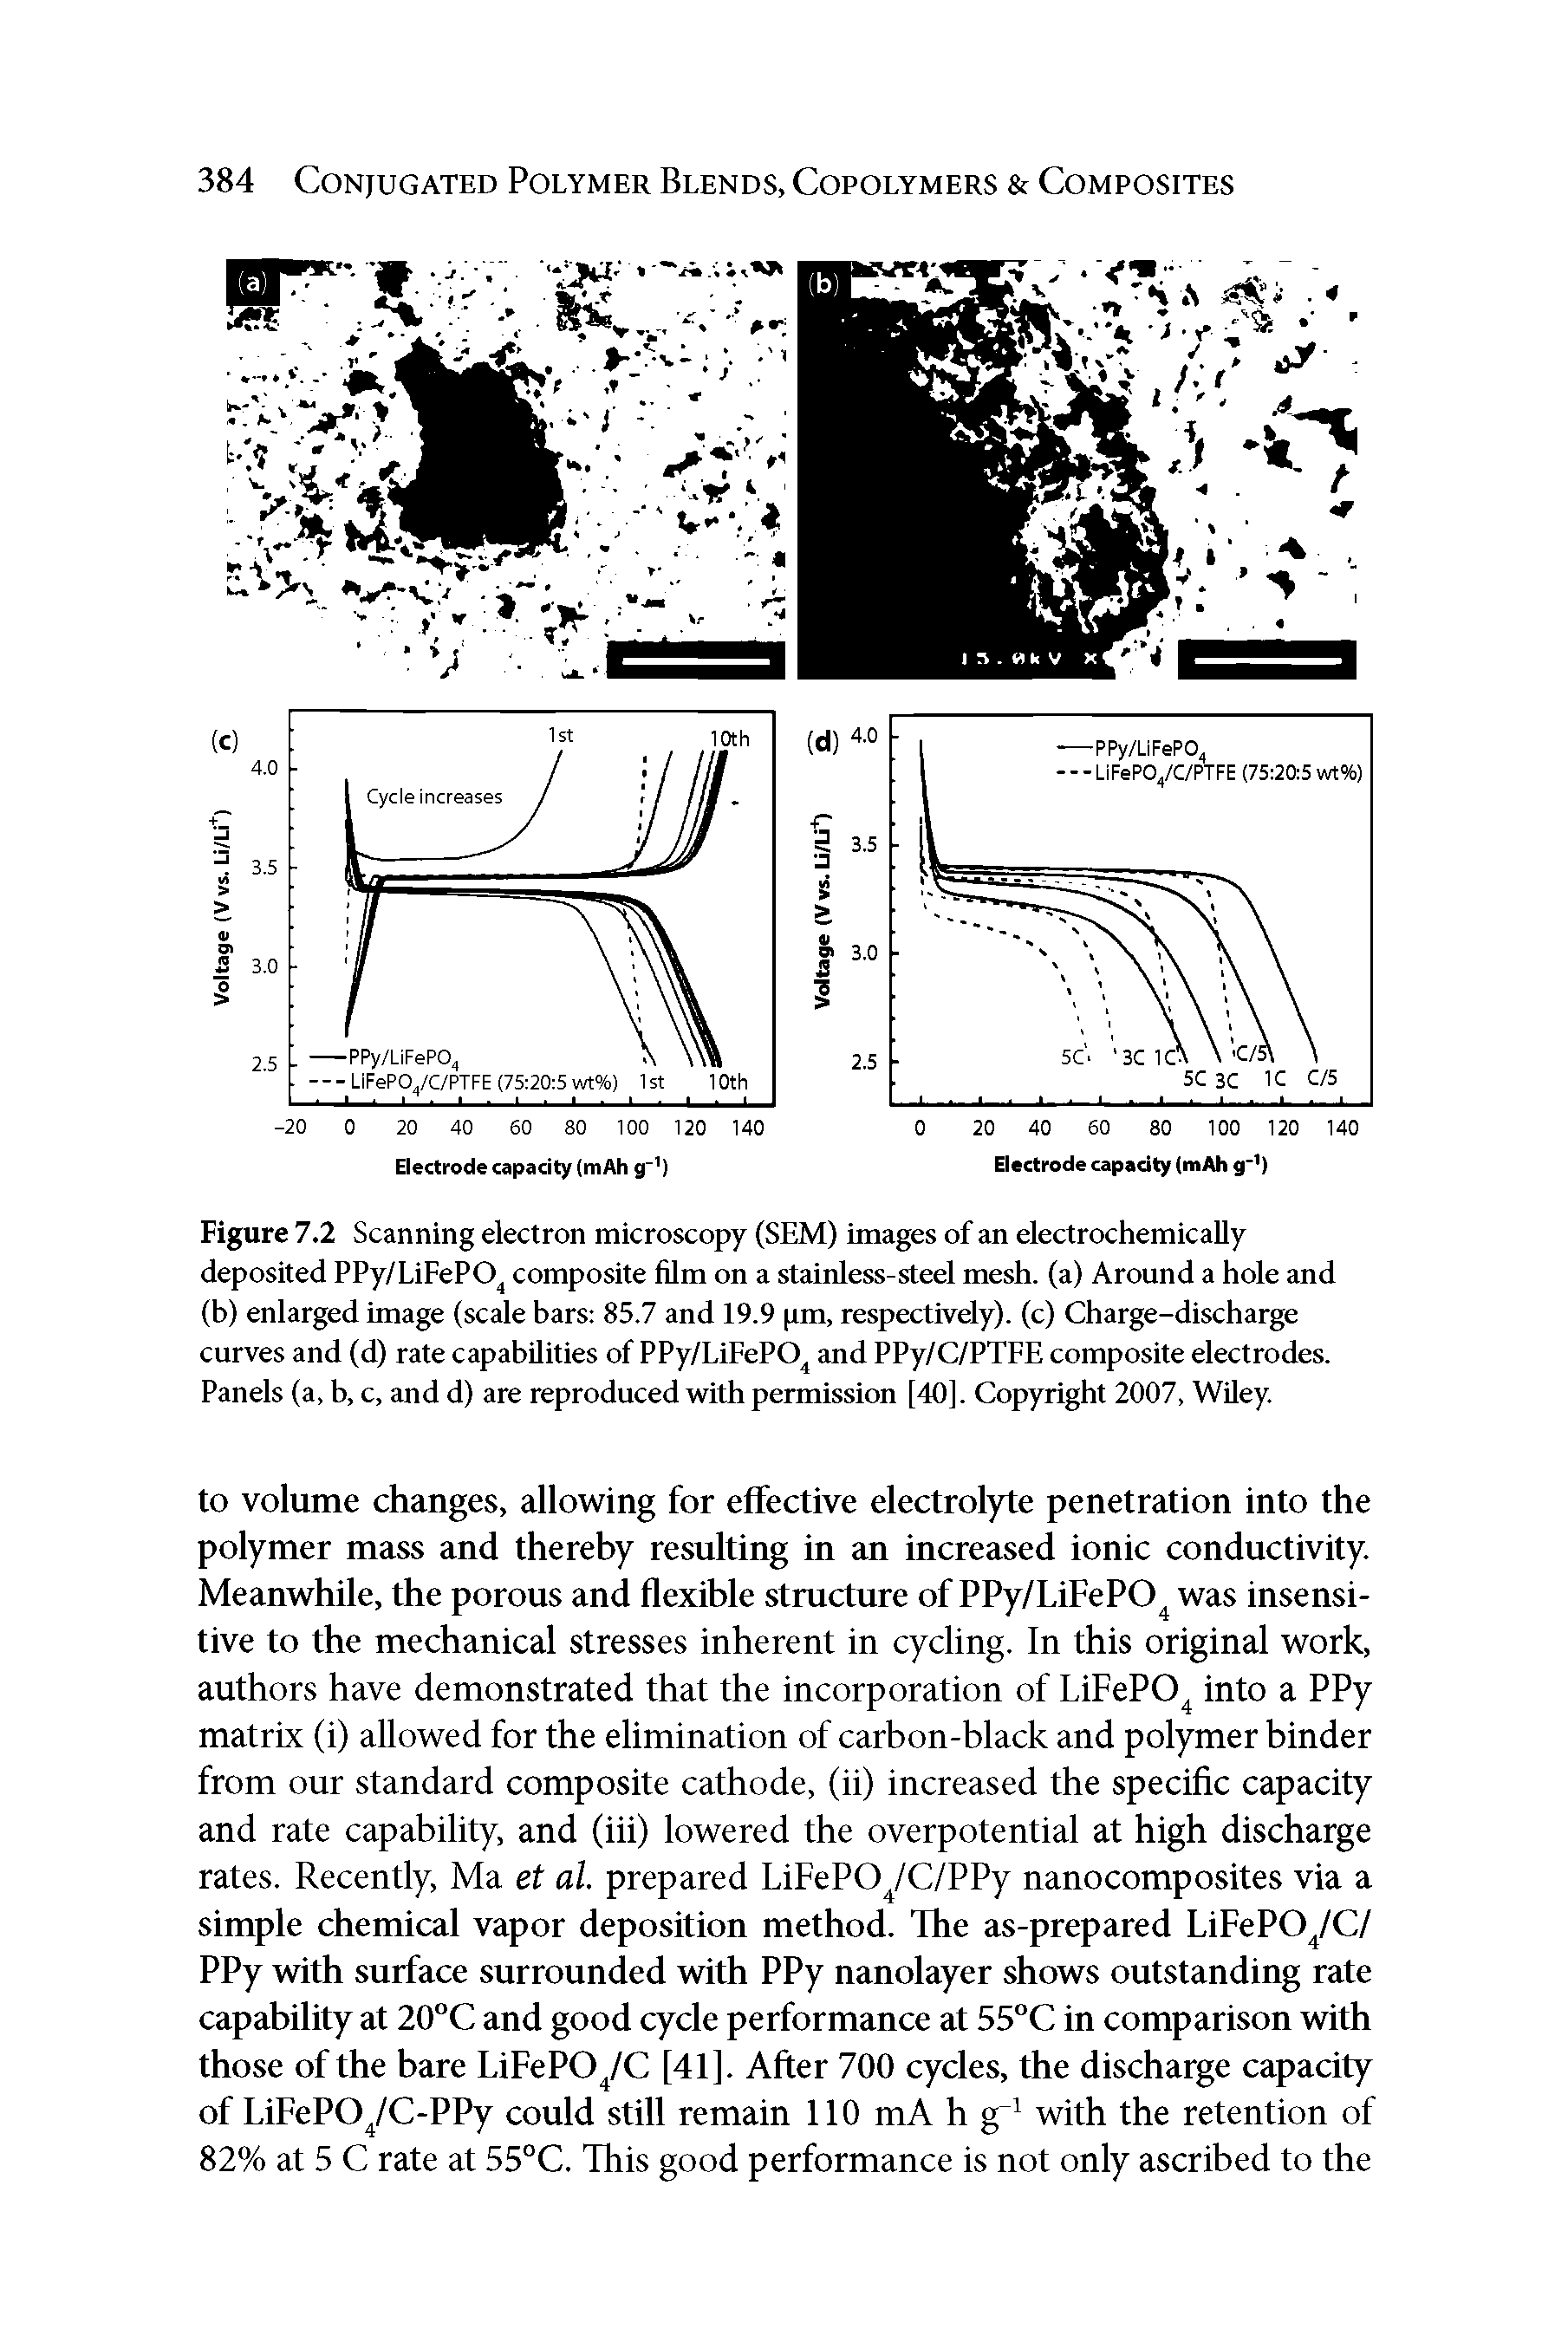 Figure 7.2 Scanning electron microscopy (SEM) images of an electrochemically deposited PPy/LiFePO composite film on a stainless-steel mesh, (a) Around a hole and (b) enlarged image (scale bars 85.7 and 19.9 pm, respectively), (c) Charge-discharge curves and (d) rate capabilities of PPy/LiFePO and PPy/C/PTFE composite electrodes. Panels (a, b, c, and d) are reproduced with permission [40]. Copyright 2007, WUey.